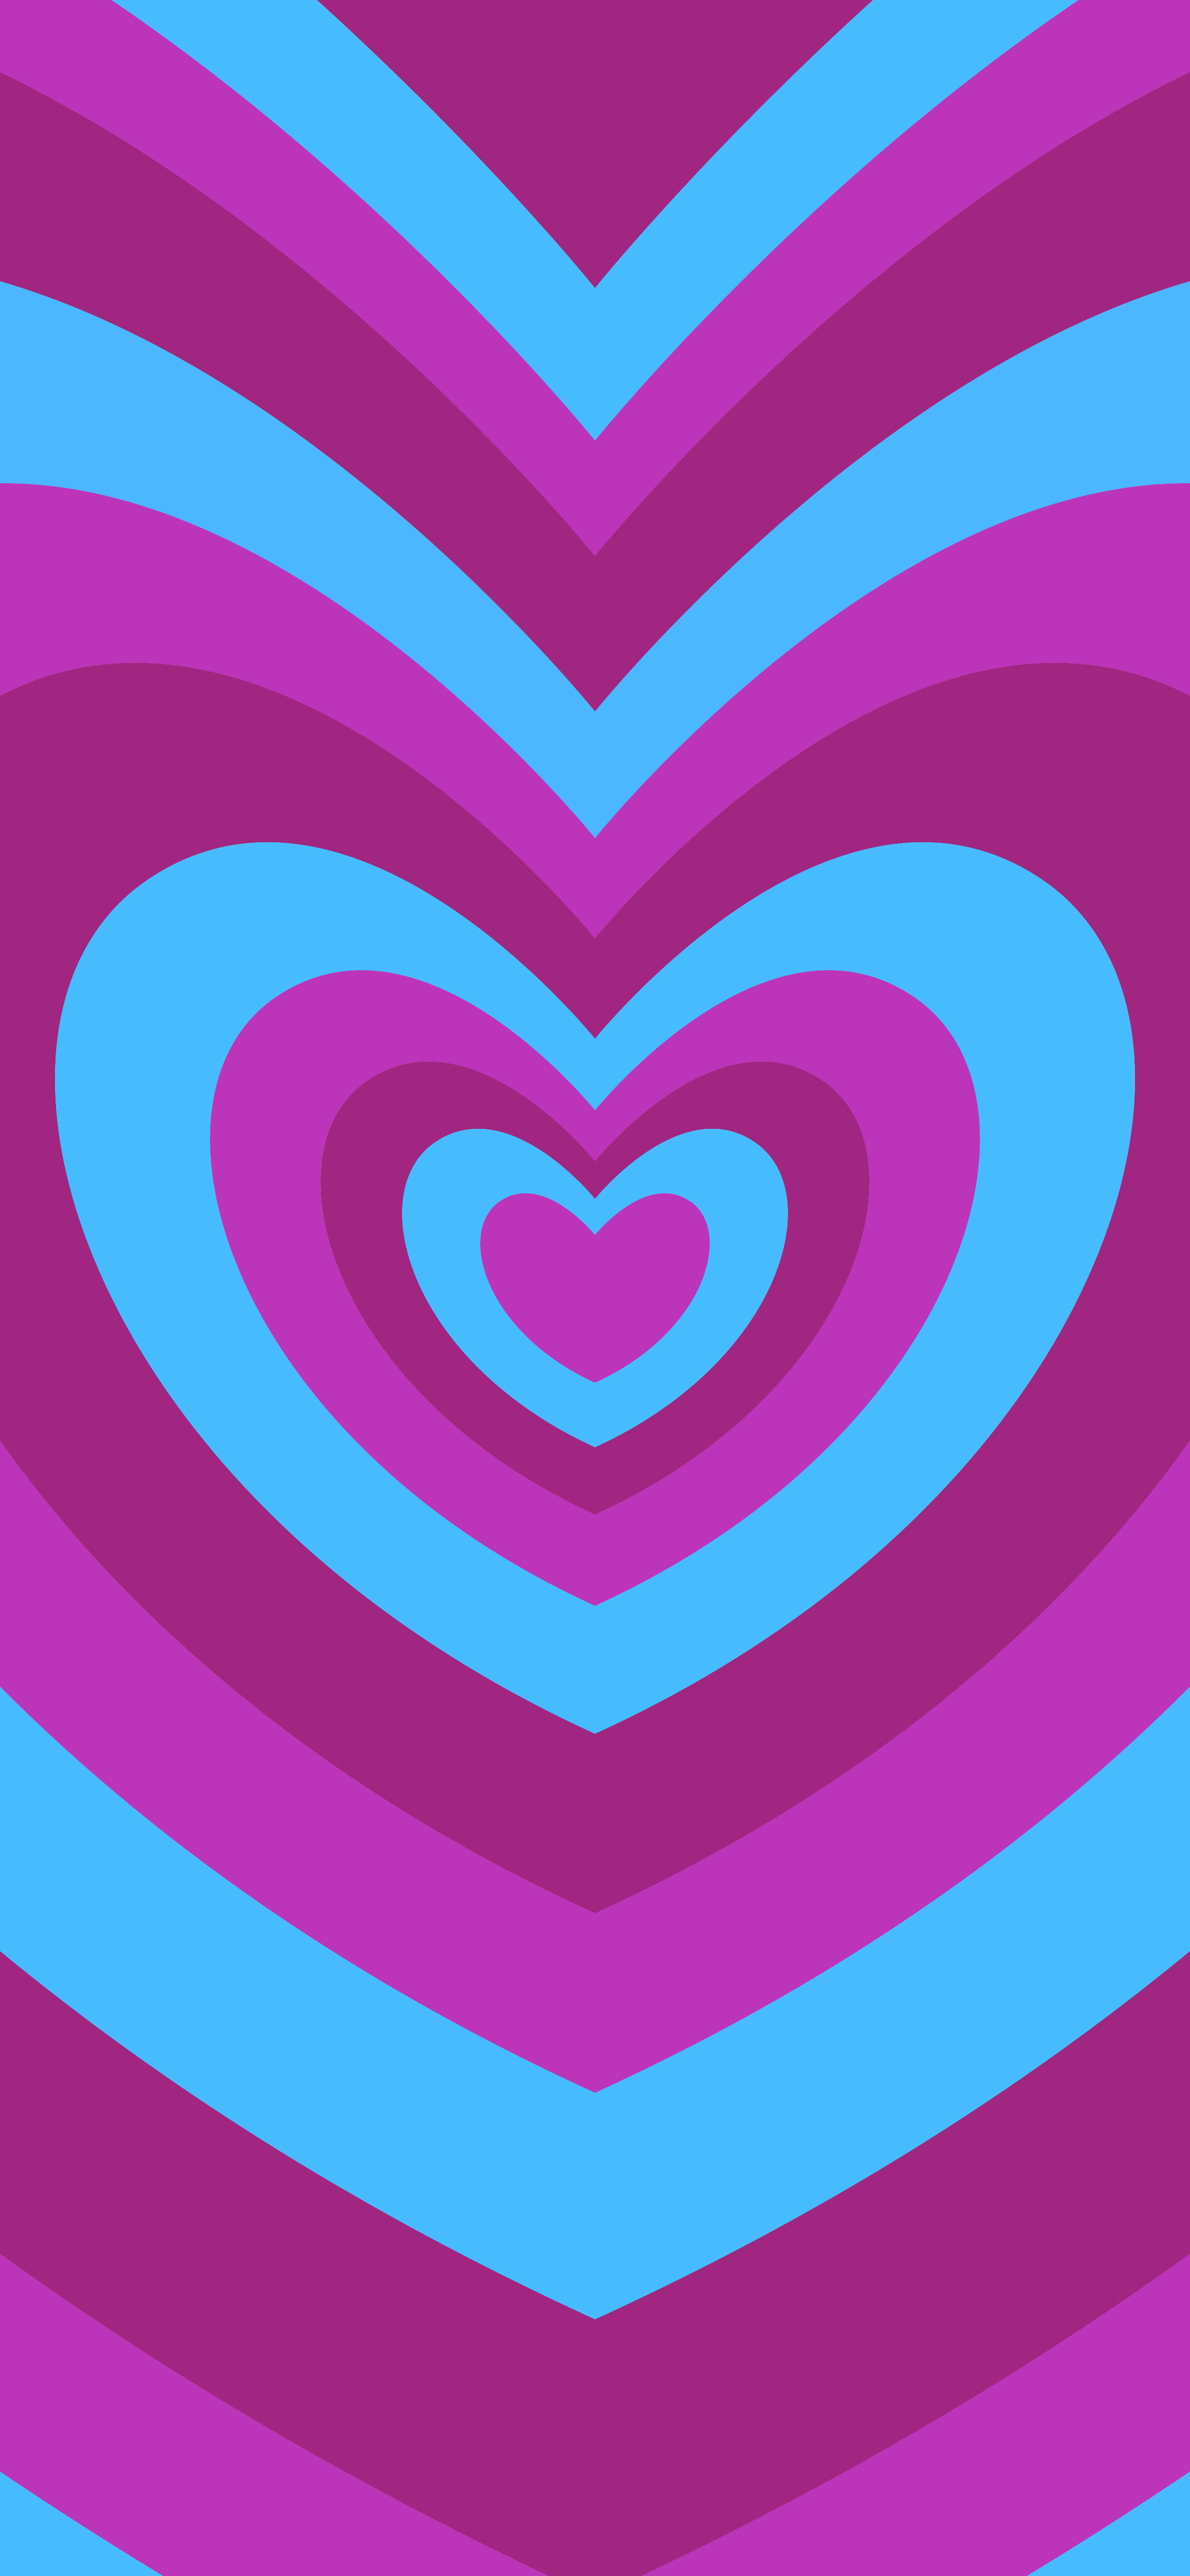 A phone wallpaper with a purple and blue heart design. - Barbie